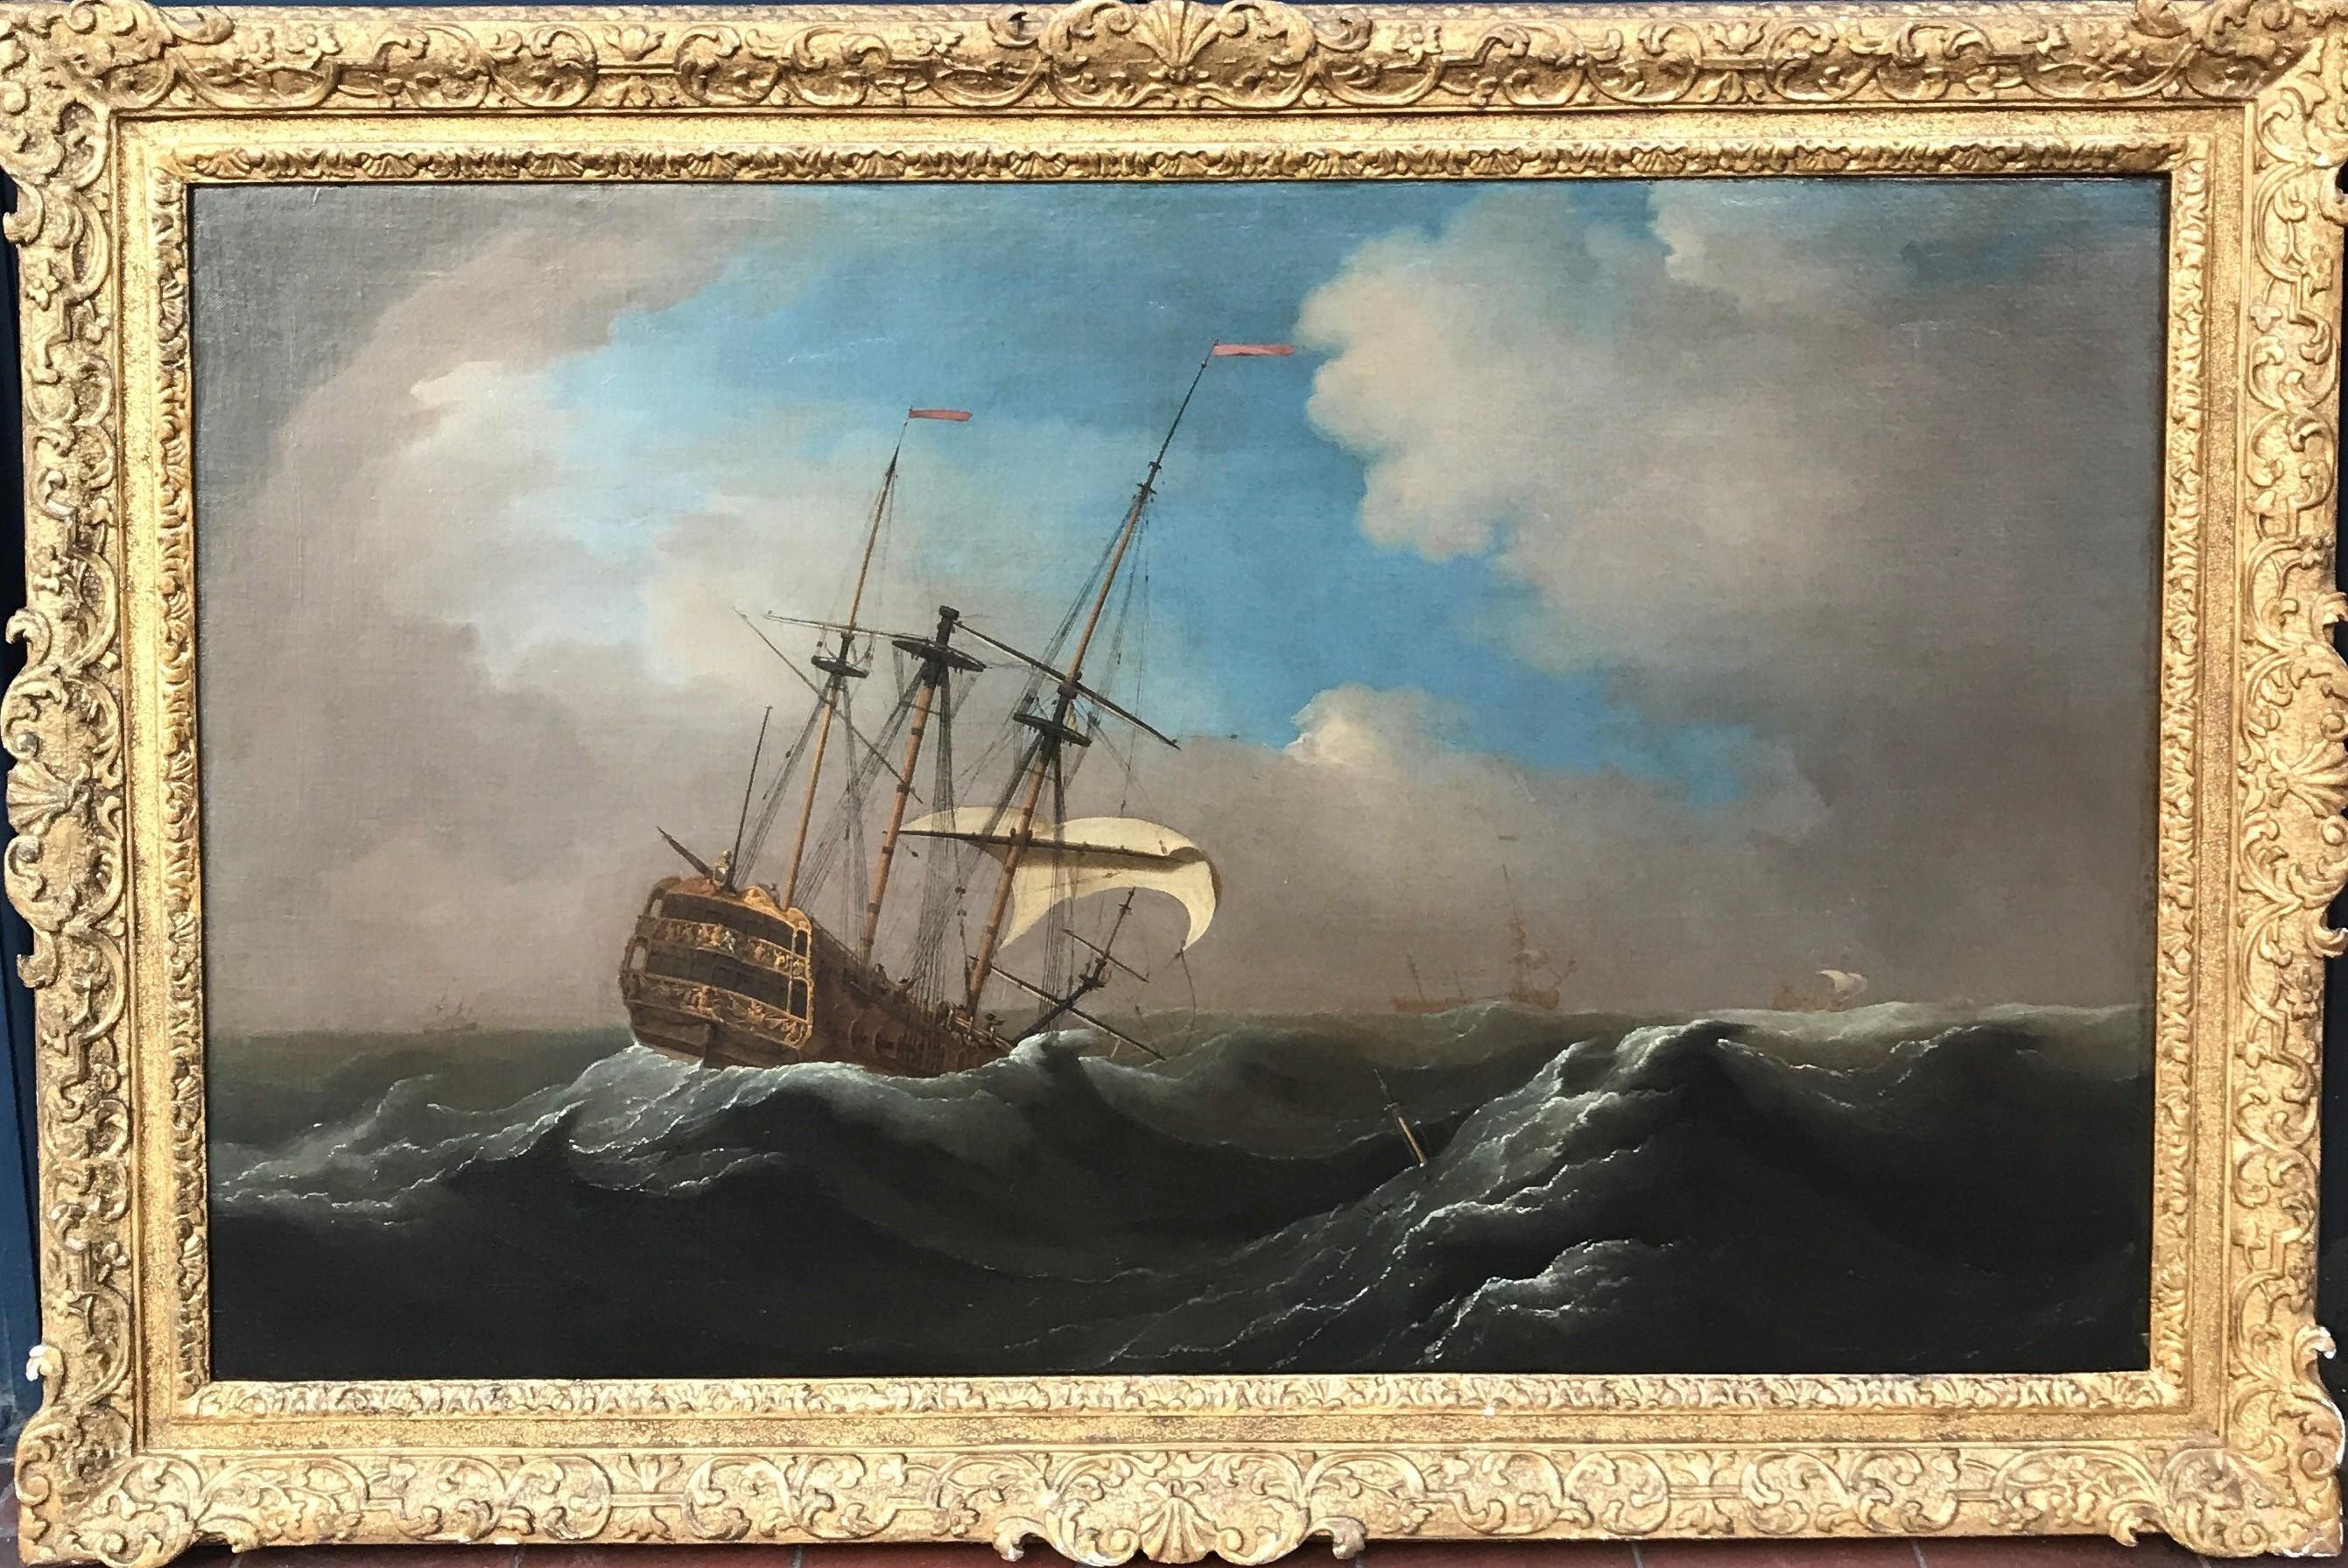 Peter MONAMY (1681-1749, English)
After the Storm
c. 1740
Oil on canvas
Framed in a carved and gilded period frame
Framed 33 ¼ x 48 ¾ inches
Provenance: Christie’s 1972

Peter Monamy was baptised at the church of St Botolph's-without-Aldgate,